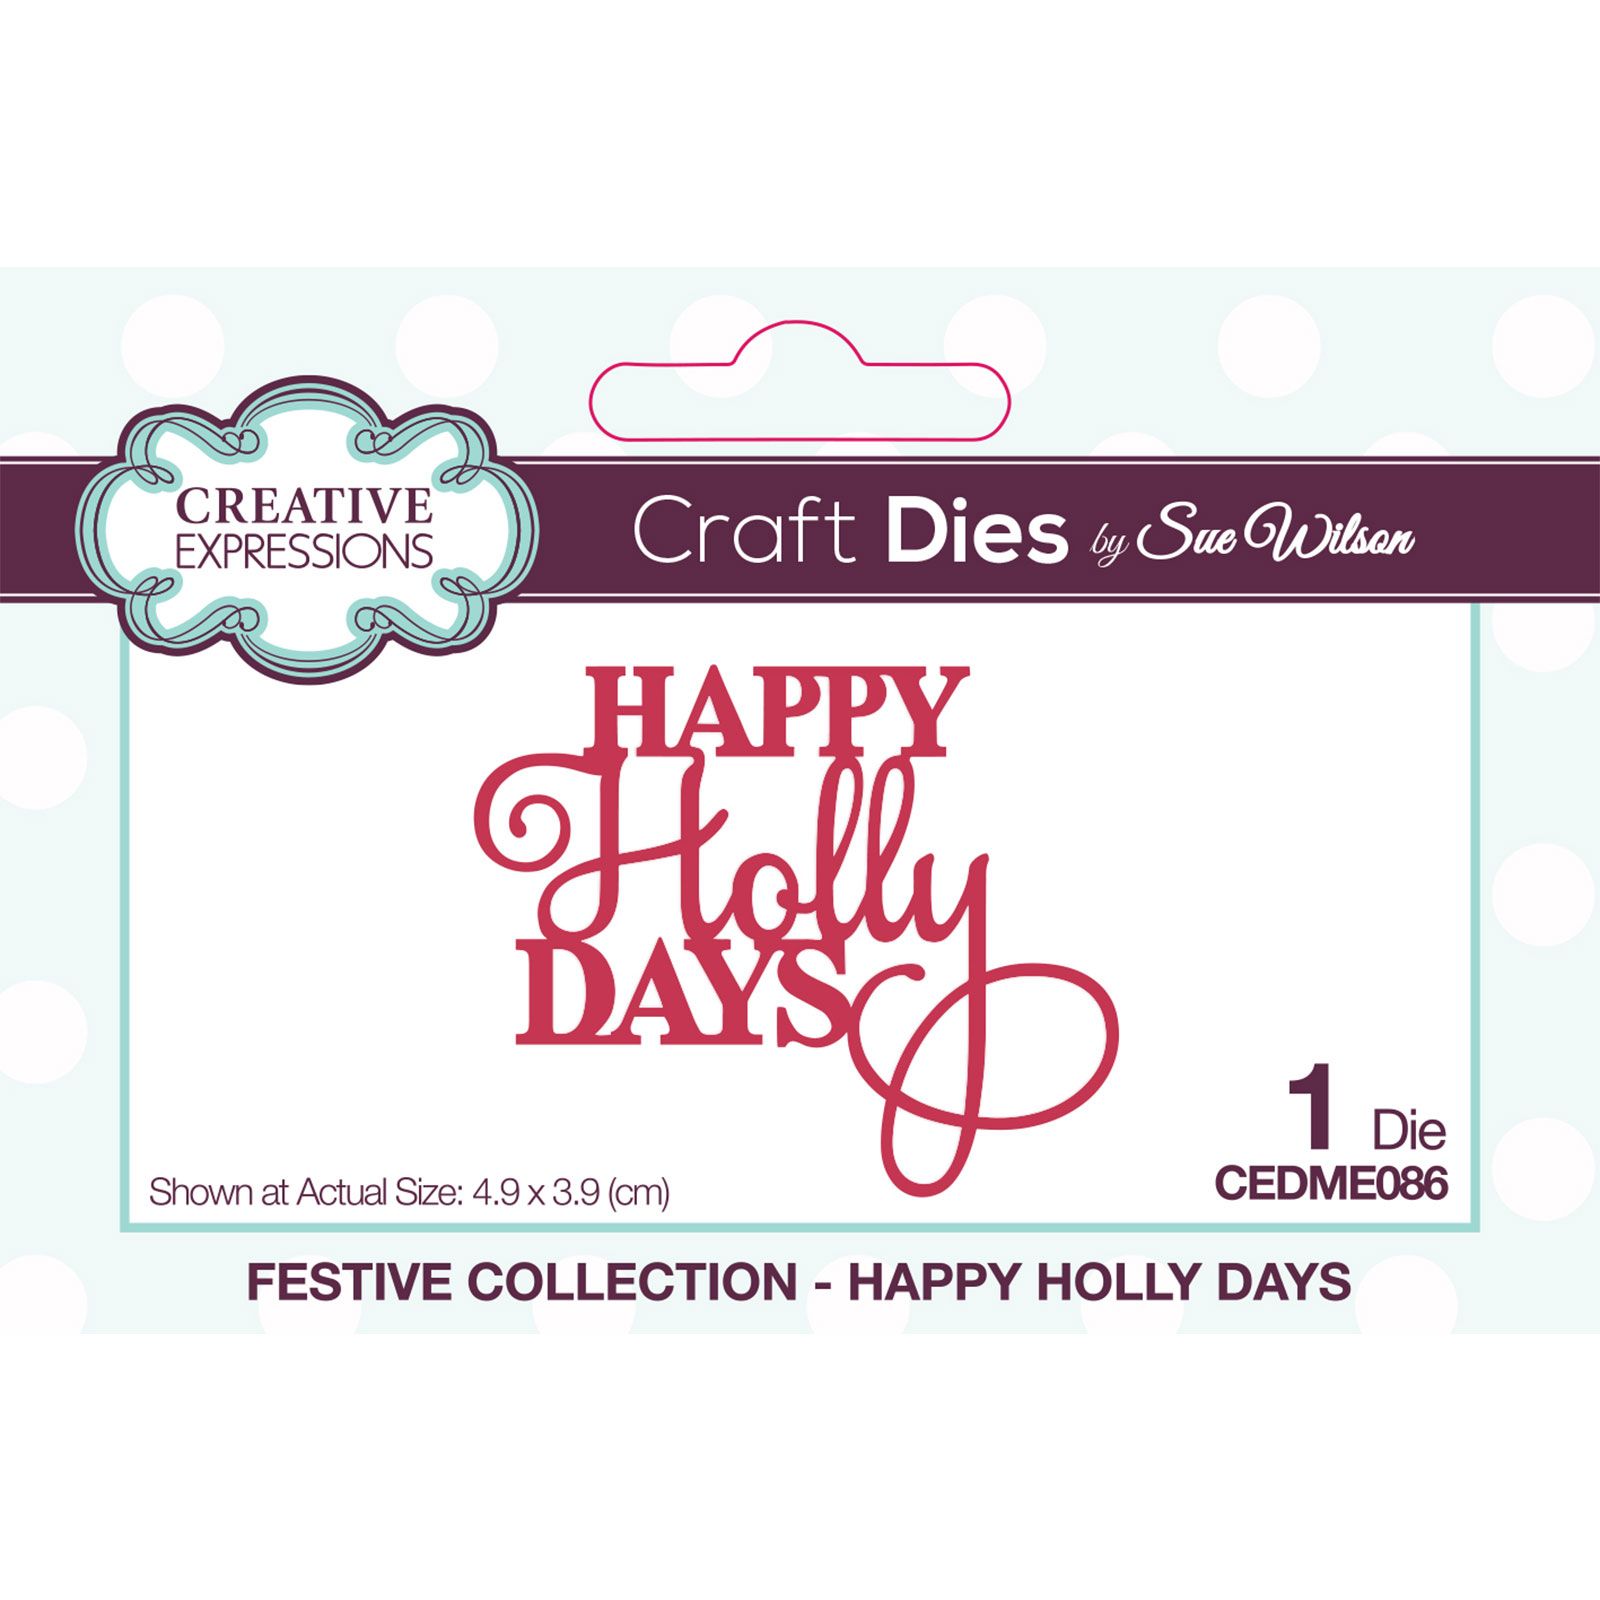 Creative Expressions • Mini expressions craft die Happy holly days